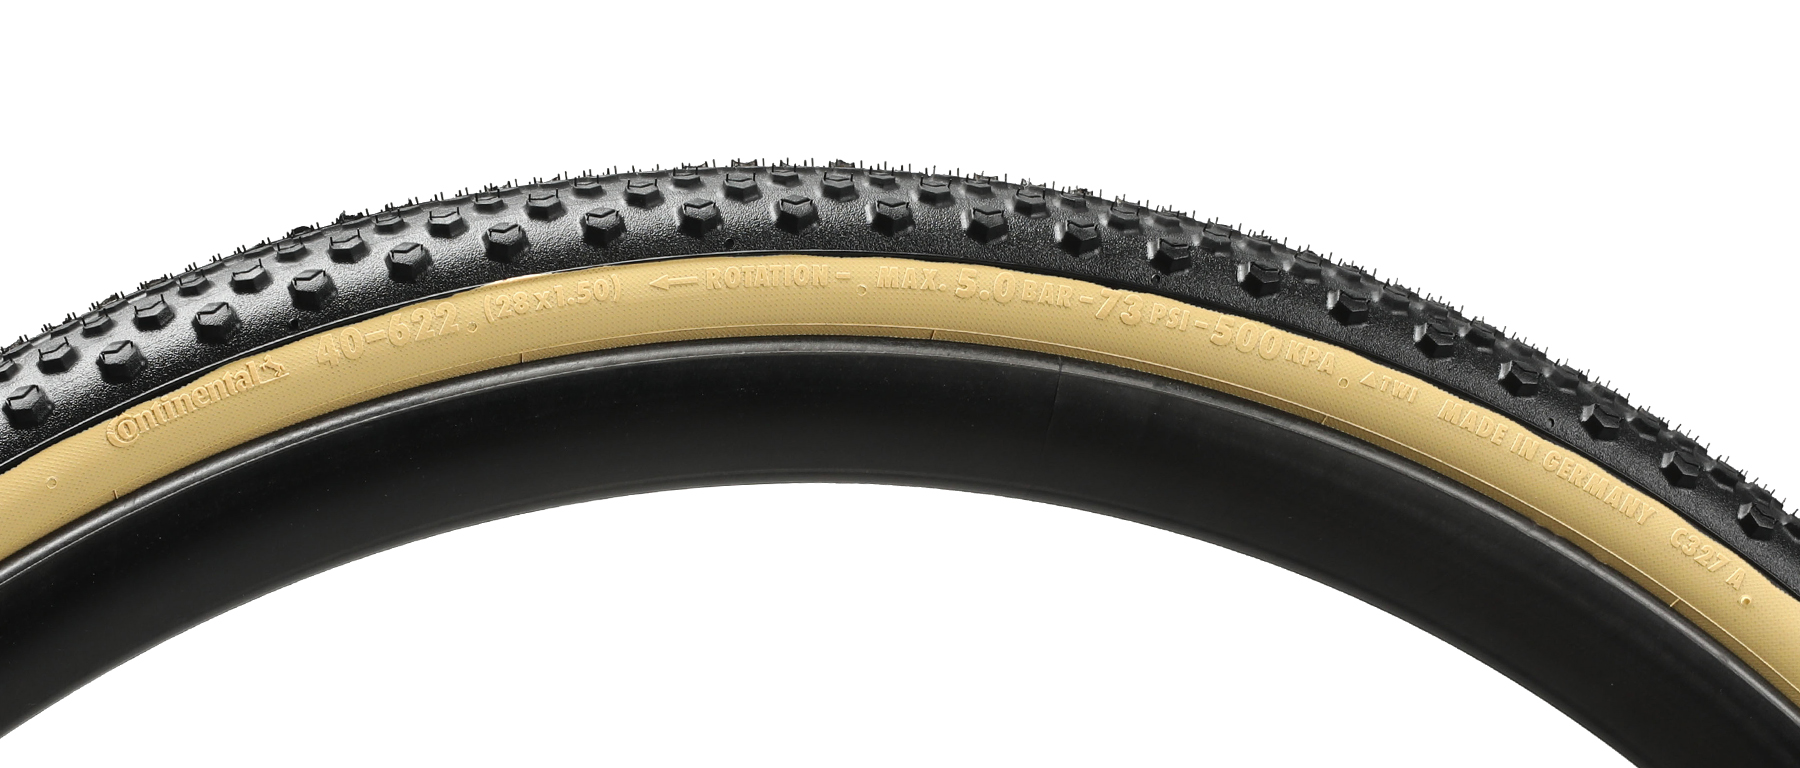 Continental Terra Trail ProTection Tire